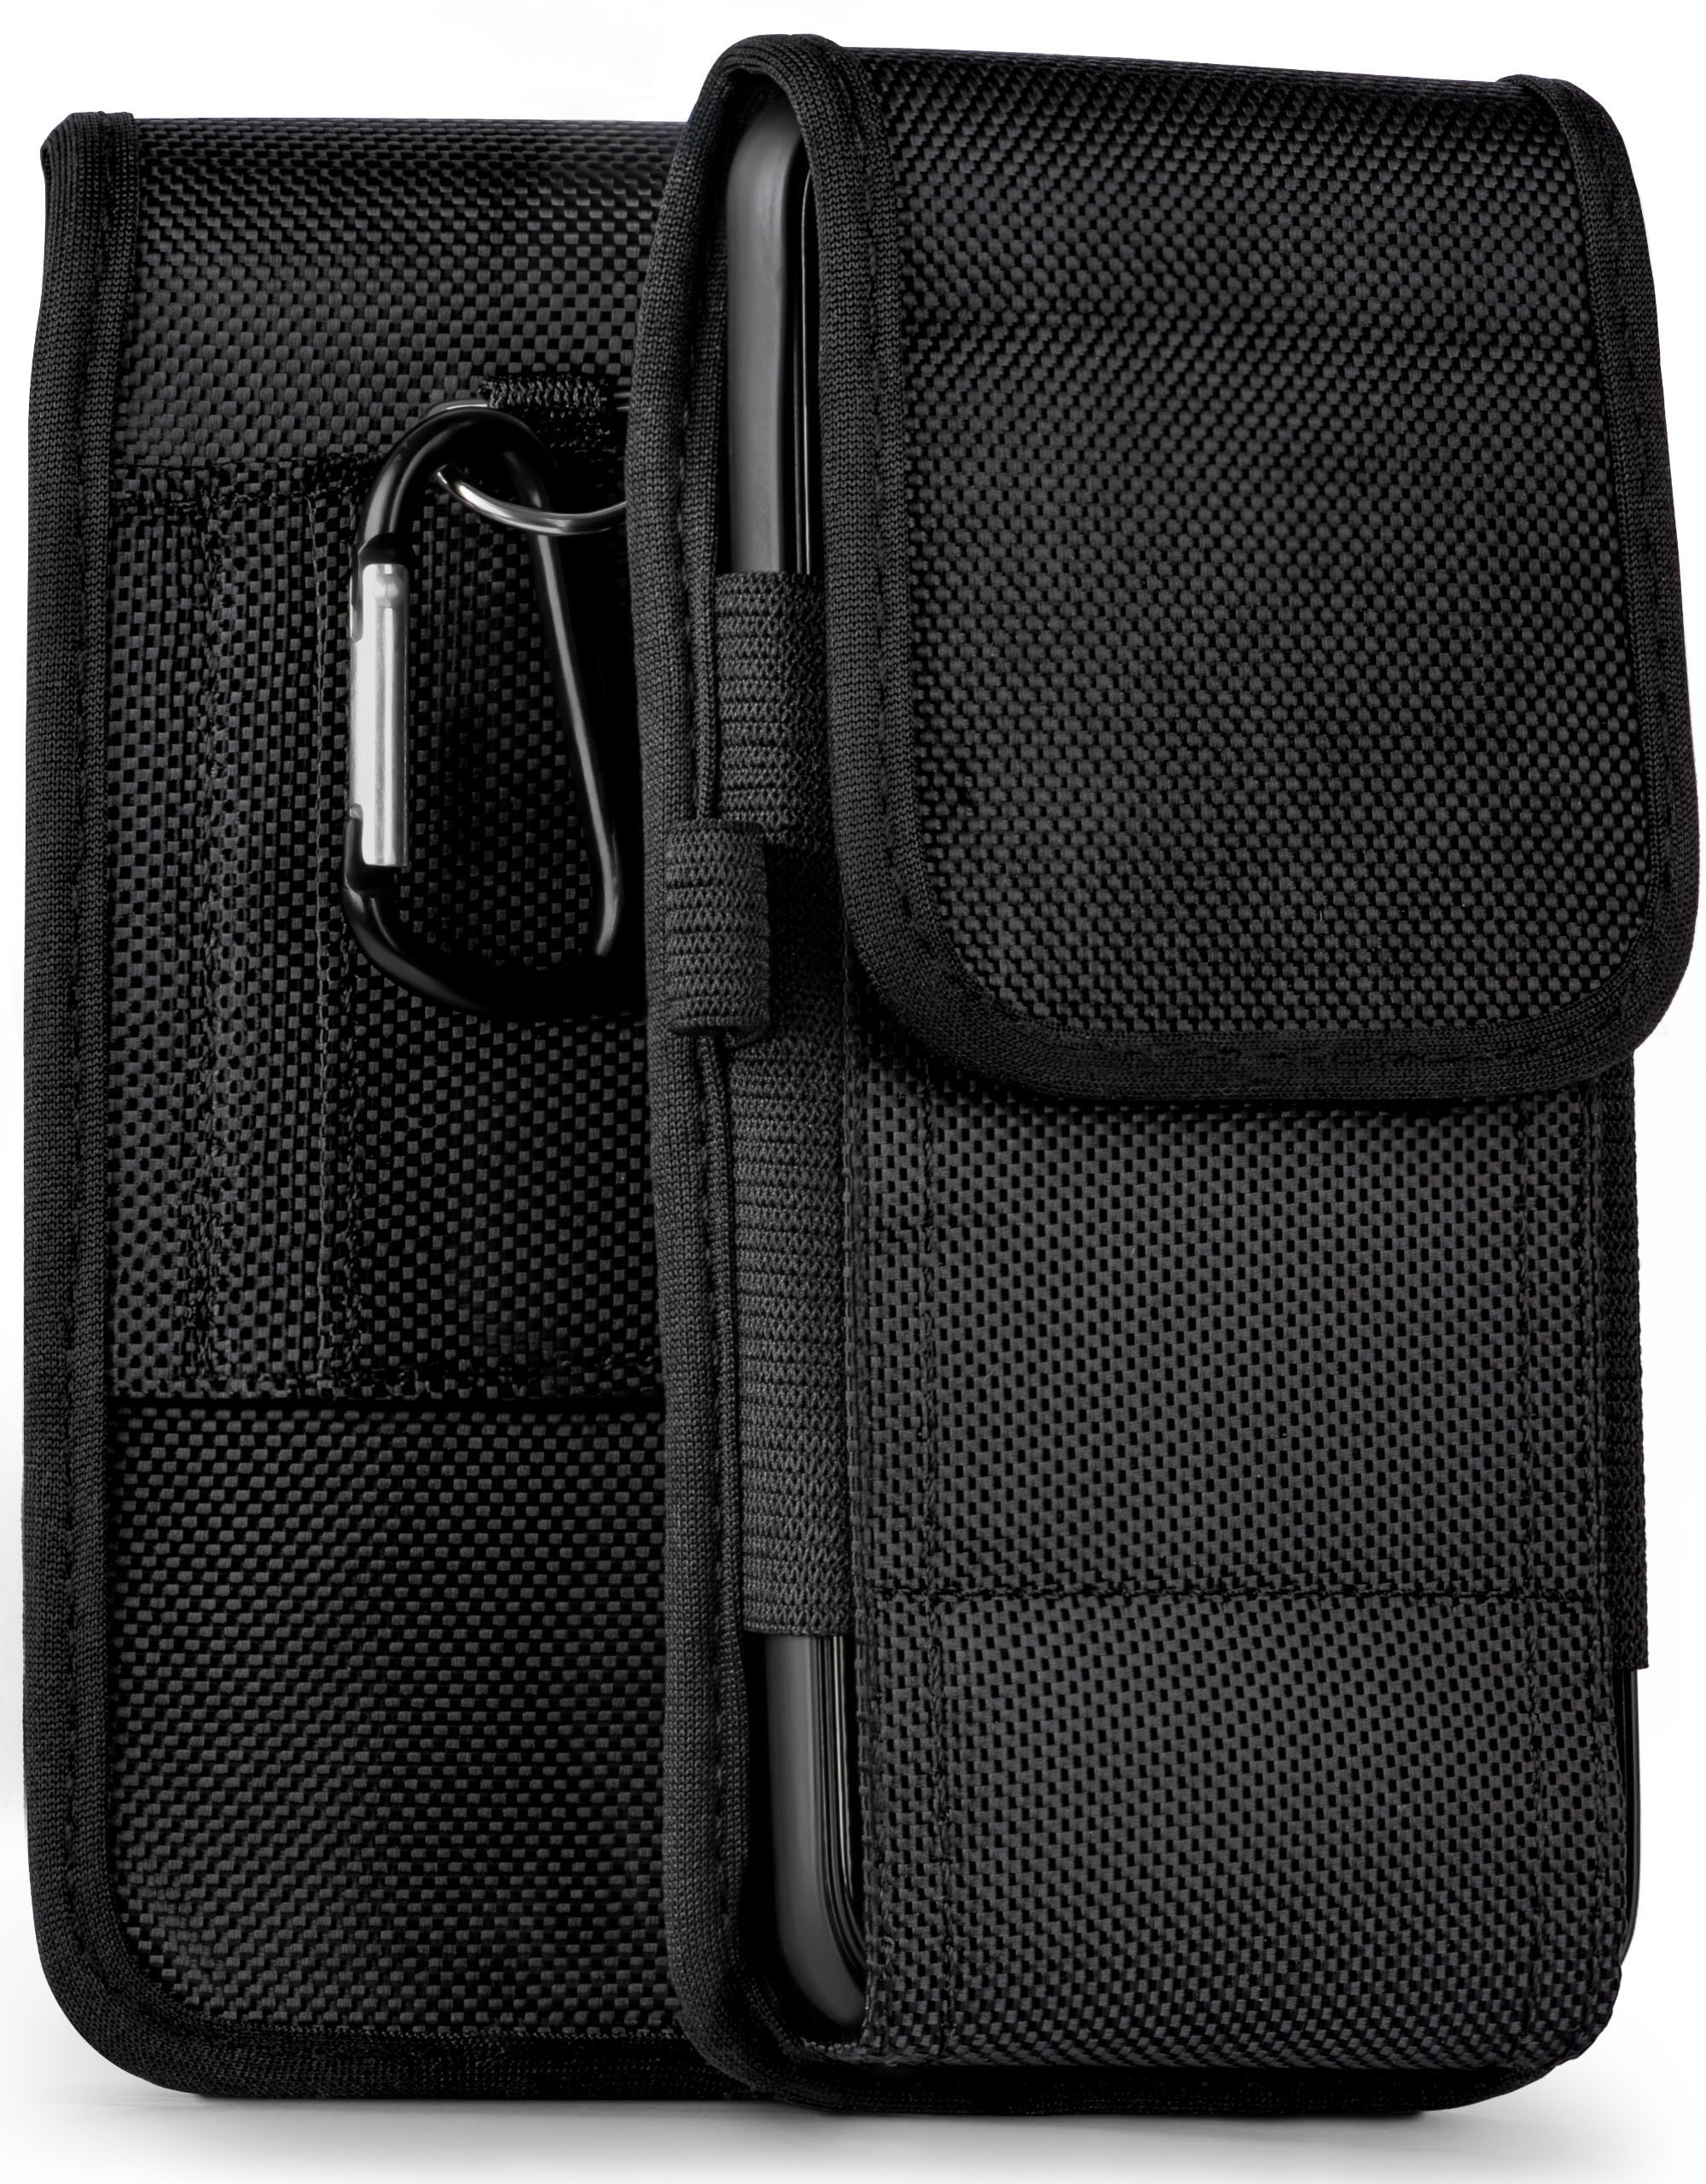 Harry 2, Trail MOEX Wiko, Agility Case, Holster,